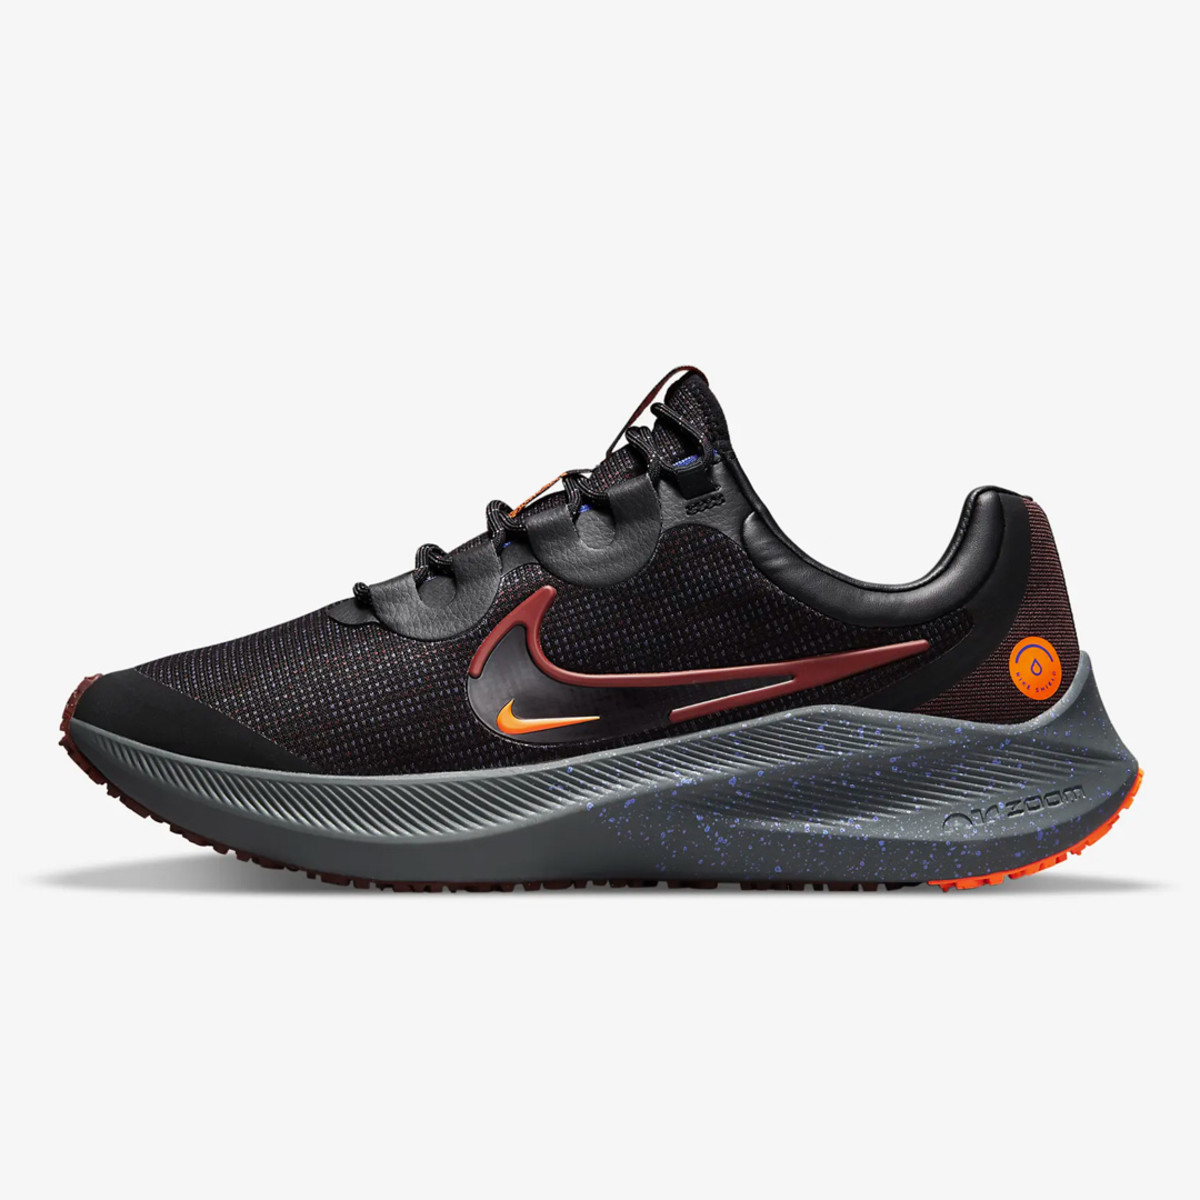 Early Nike Black Friday Deals Are Live and Up to 60% Off - Men's Journal